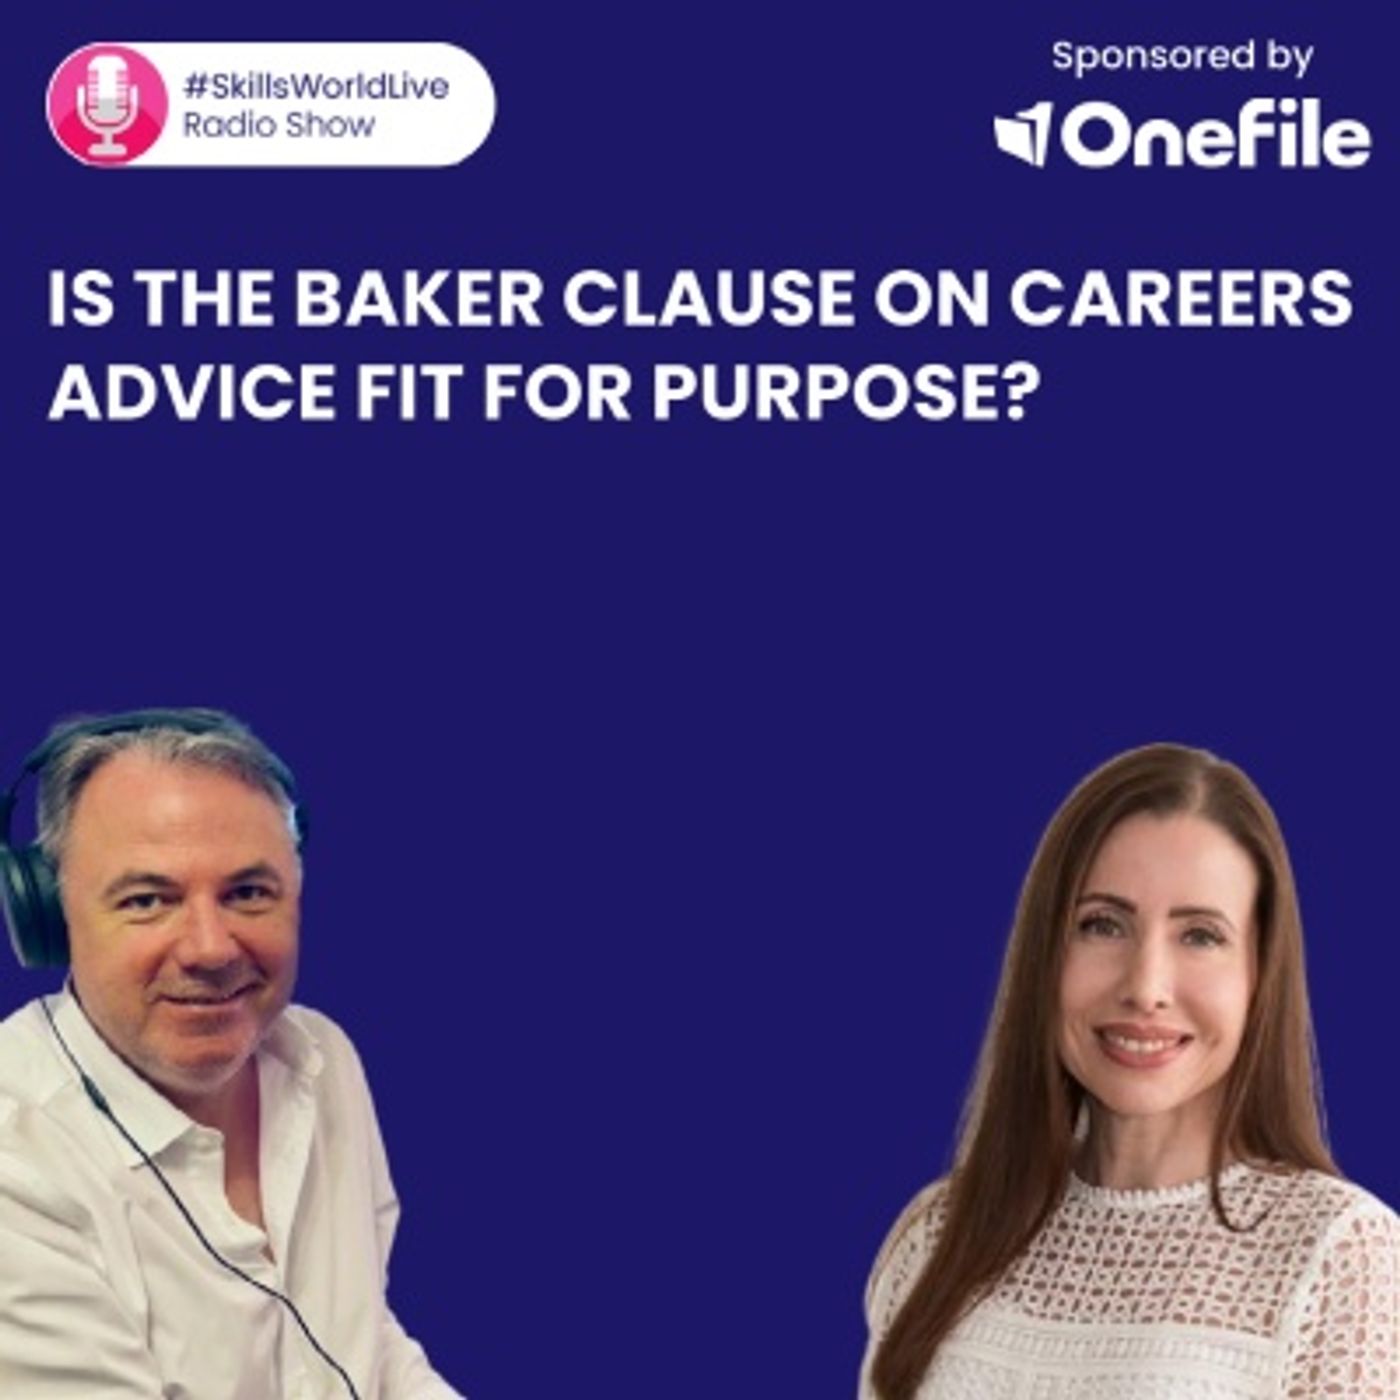 Is the Baker Clause on careers advice fit for purpose? #SkillsWorldLive 3.13